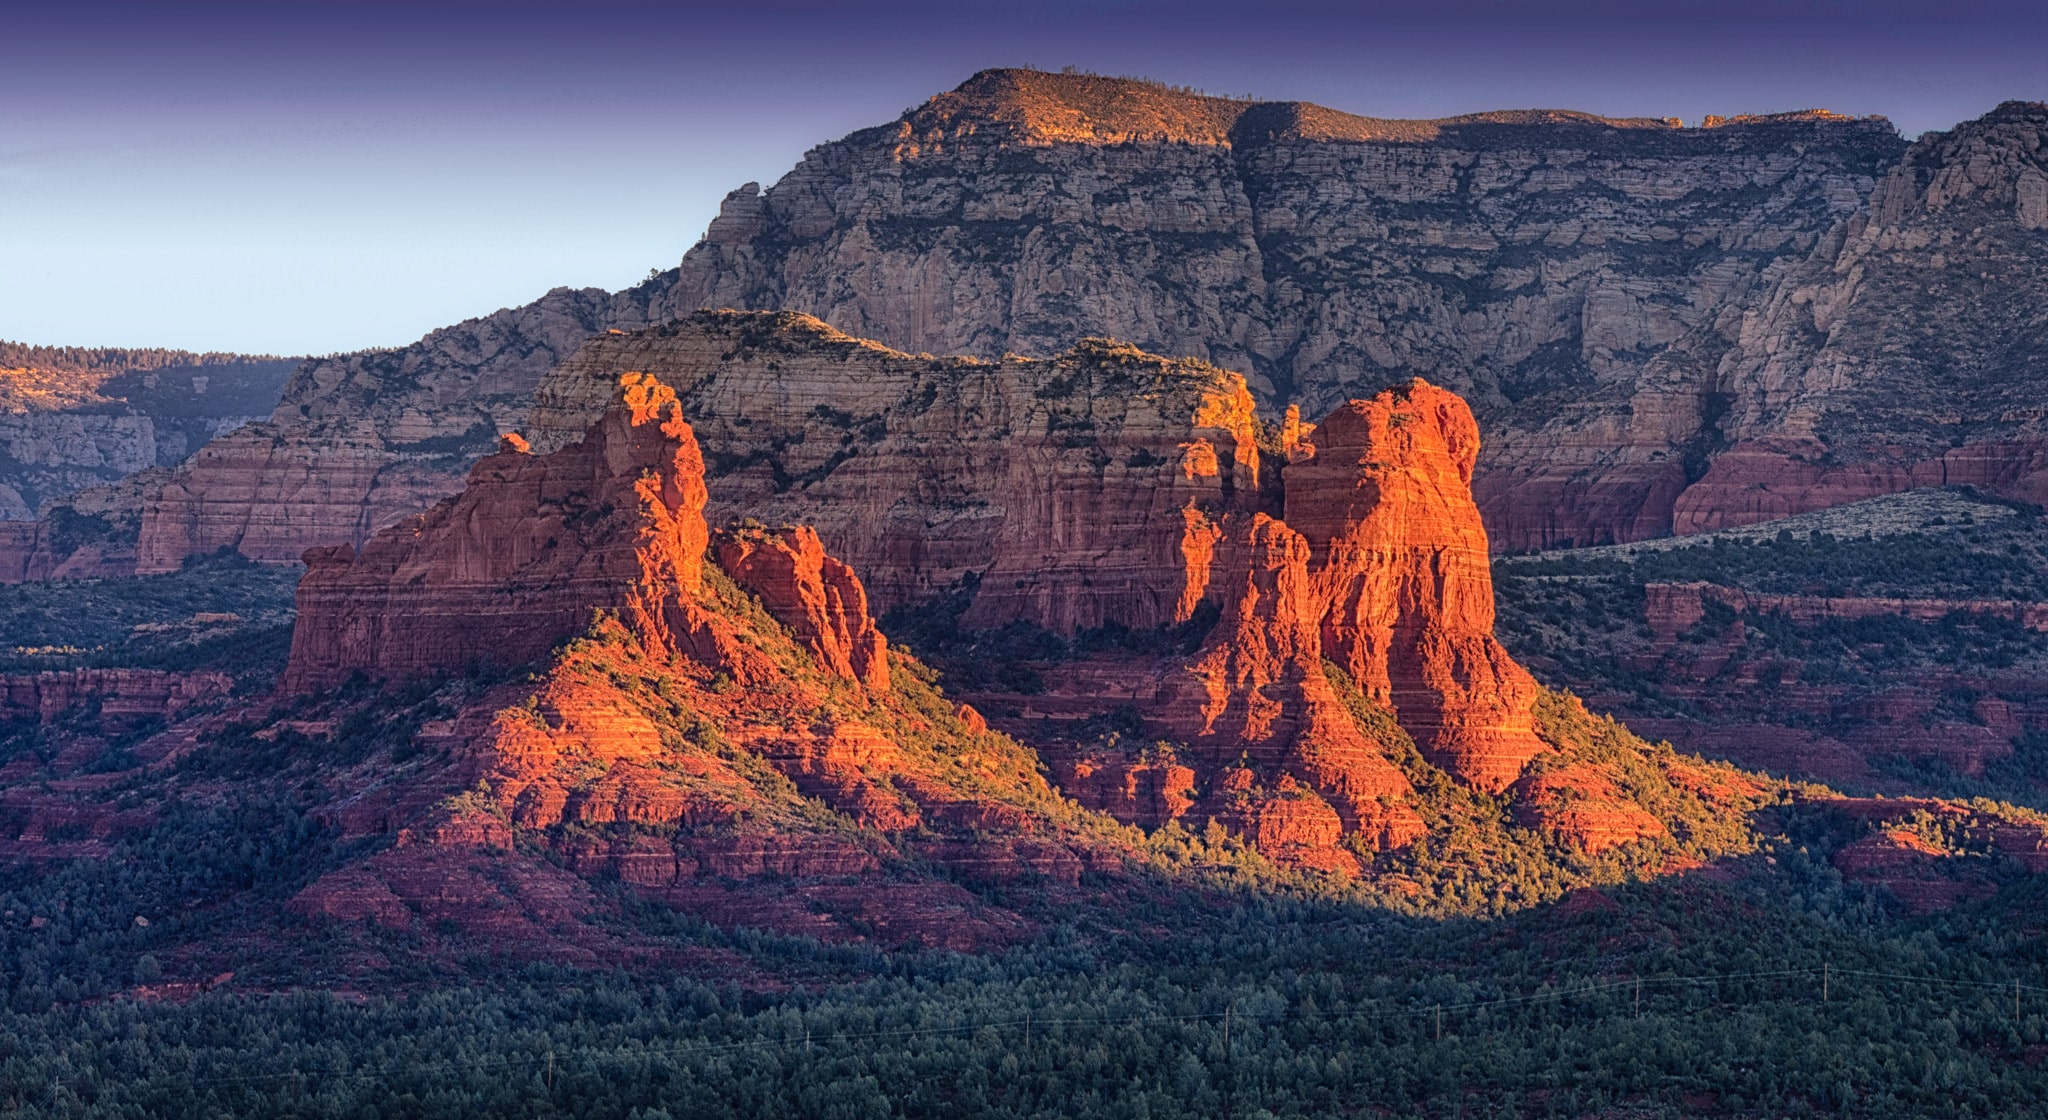 A close-up of Coffeepot Rock taken from Airport Road in Sedona, Arizona.